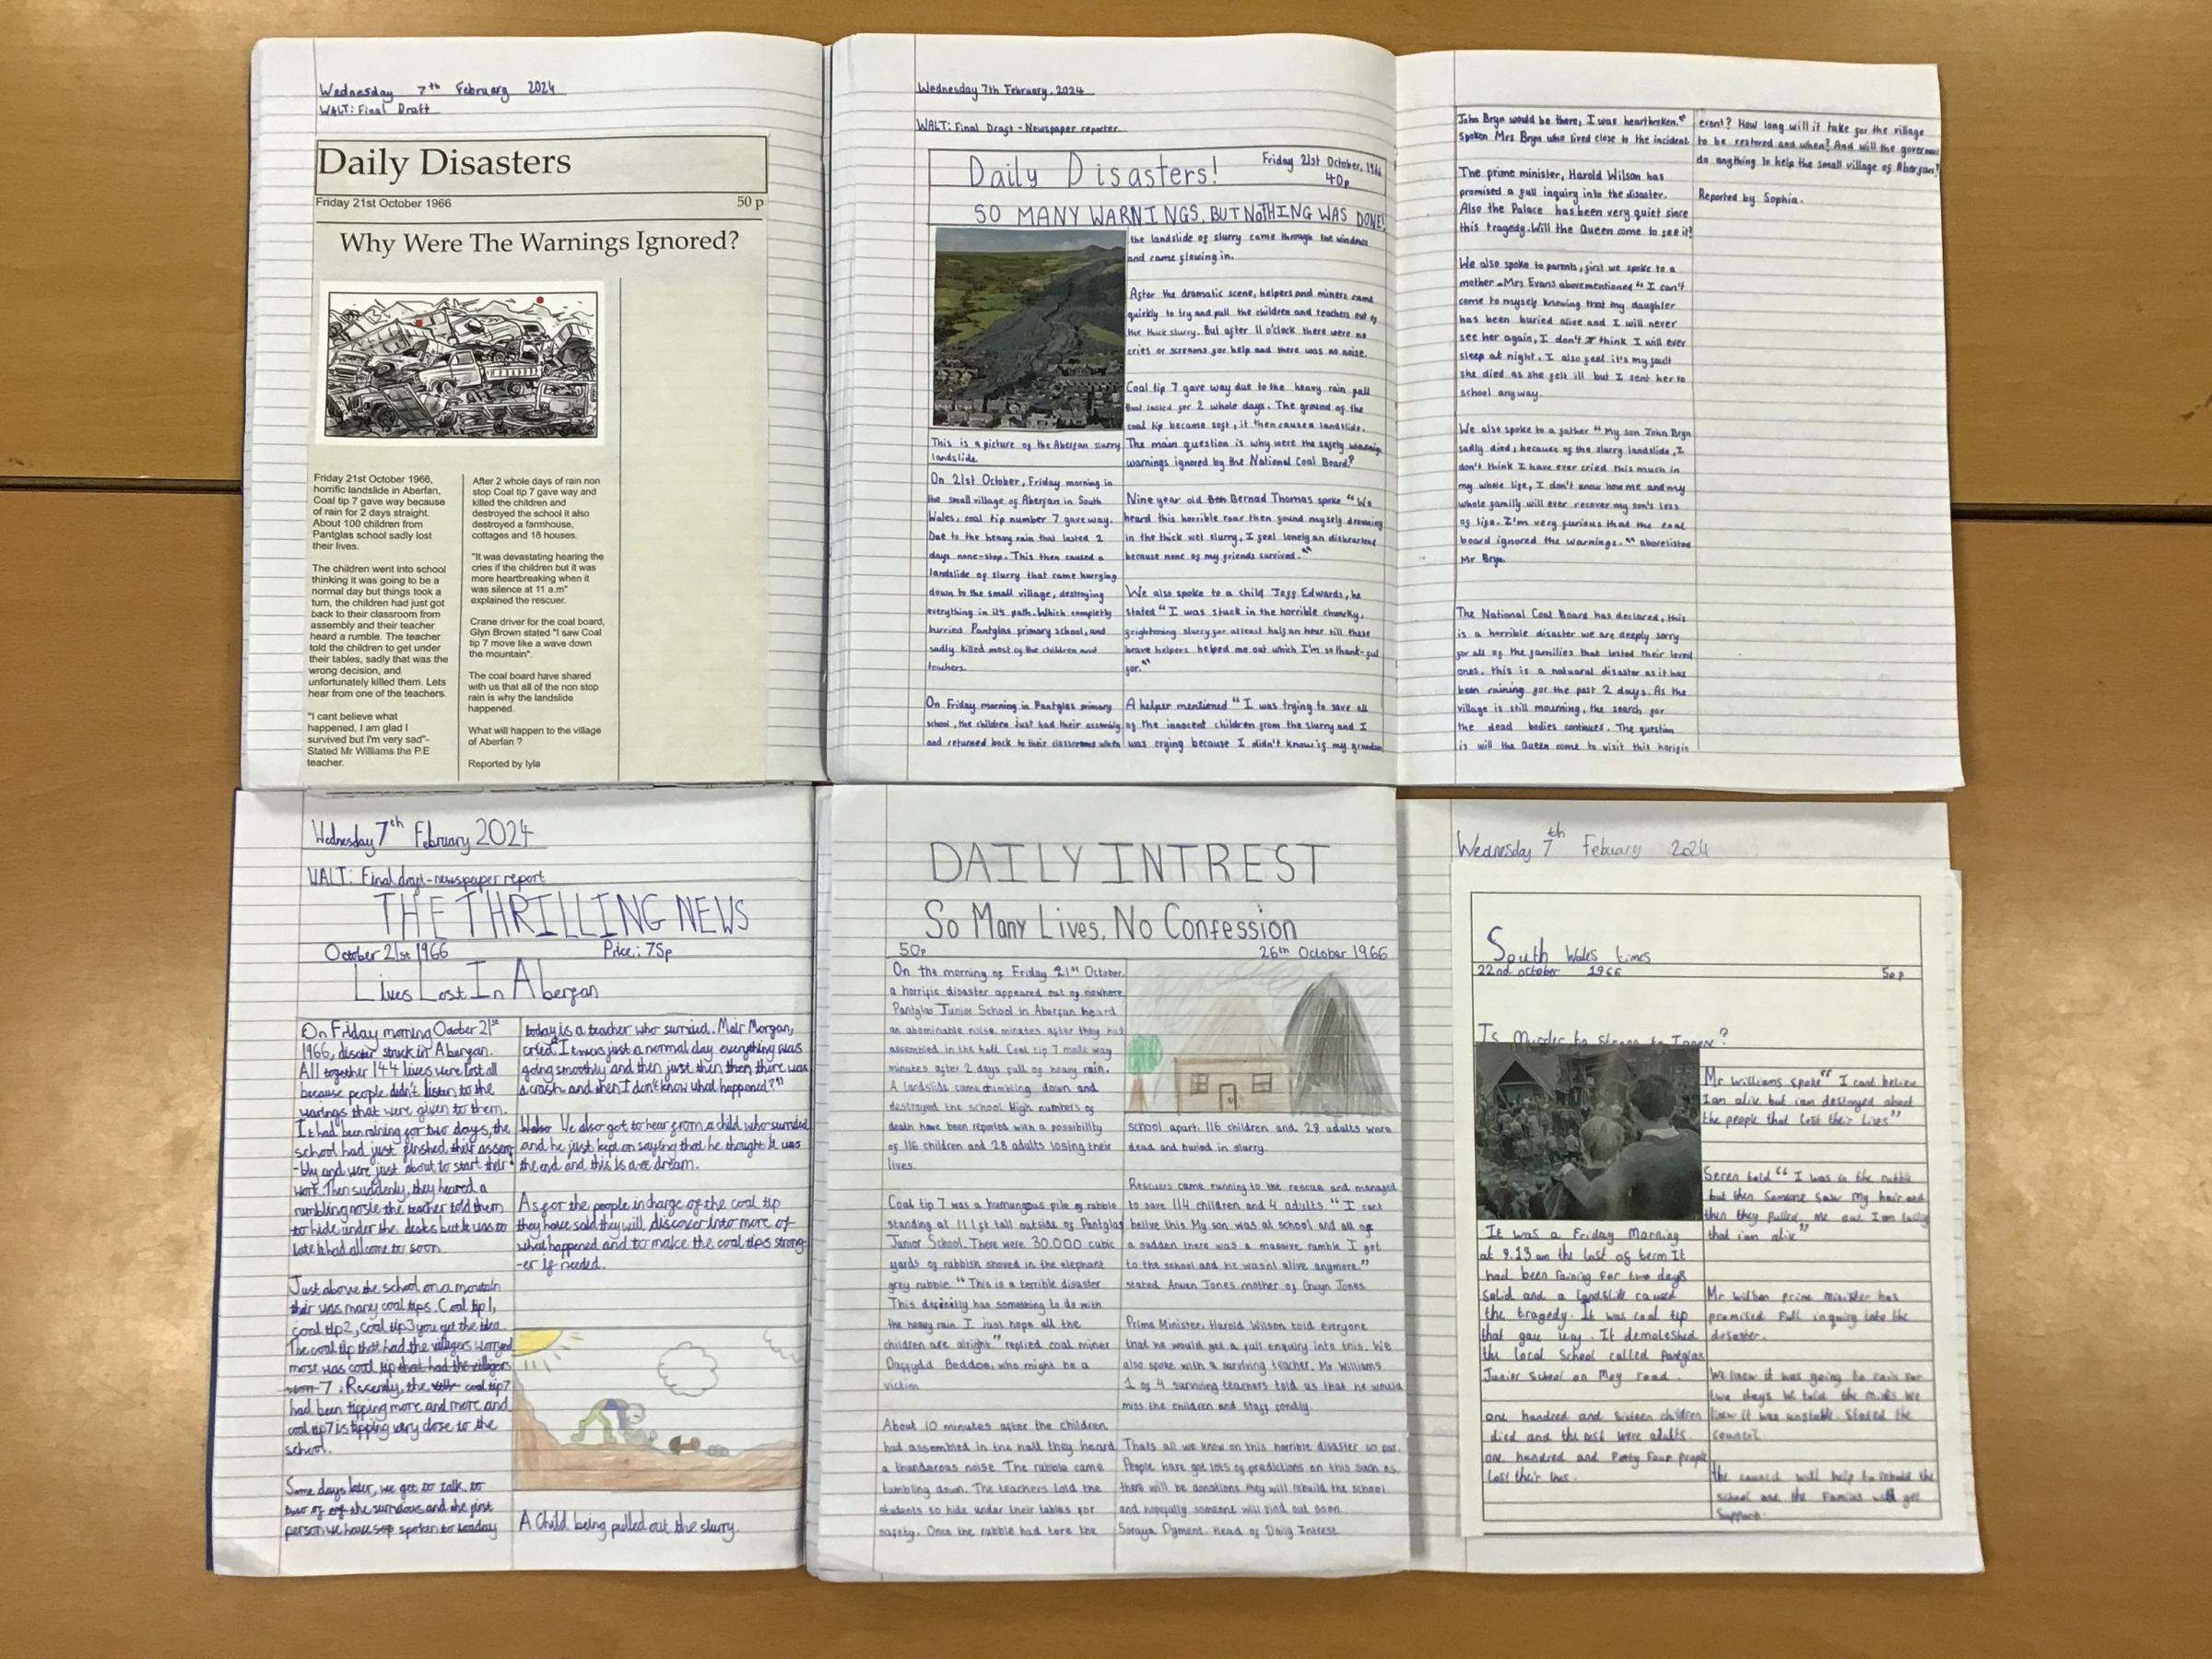 Some of the articles put together on the Abefan disaster by Year 6 pupils at Penarlag CP School.